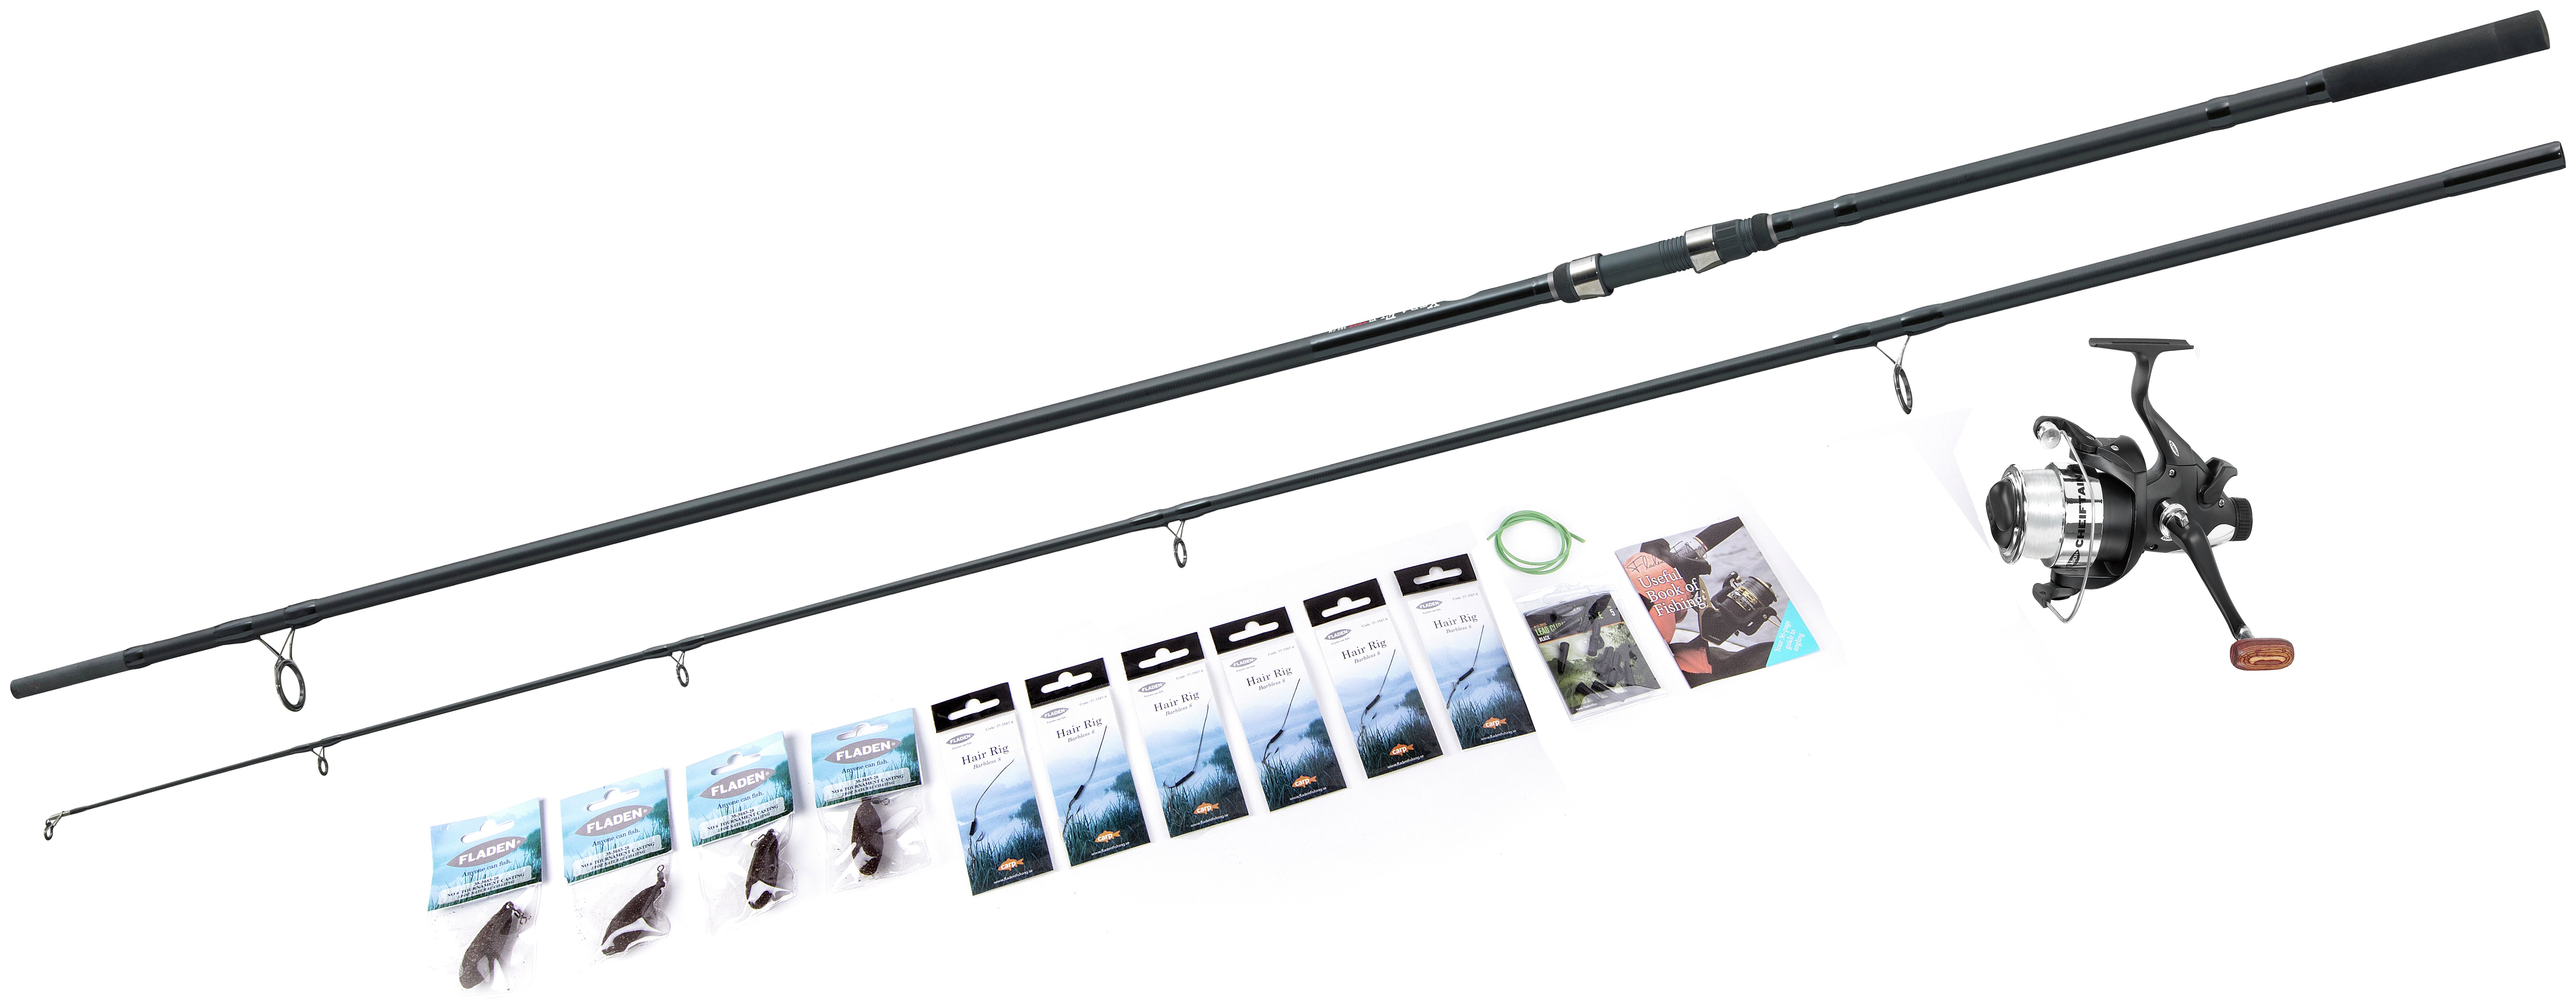 Fladen 12ft Fishing Rod and Reel Set